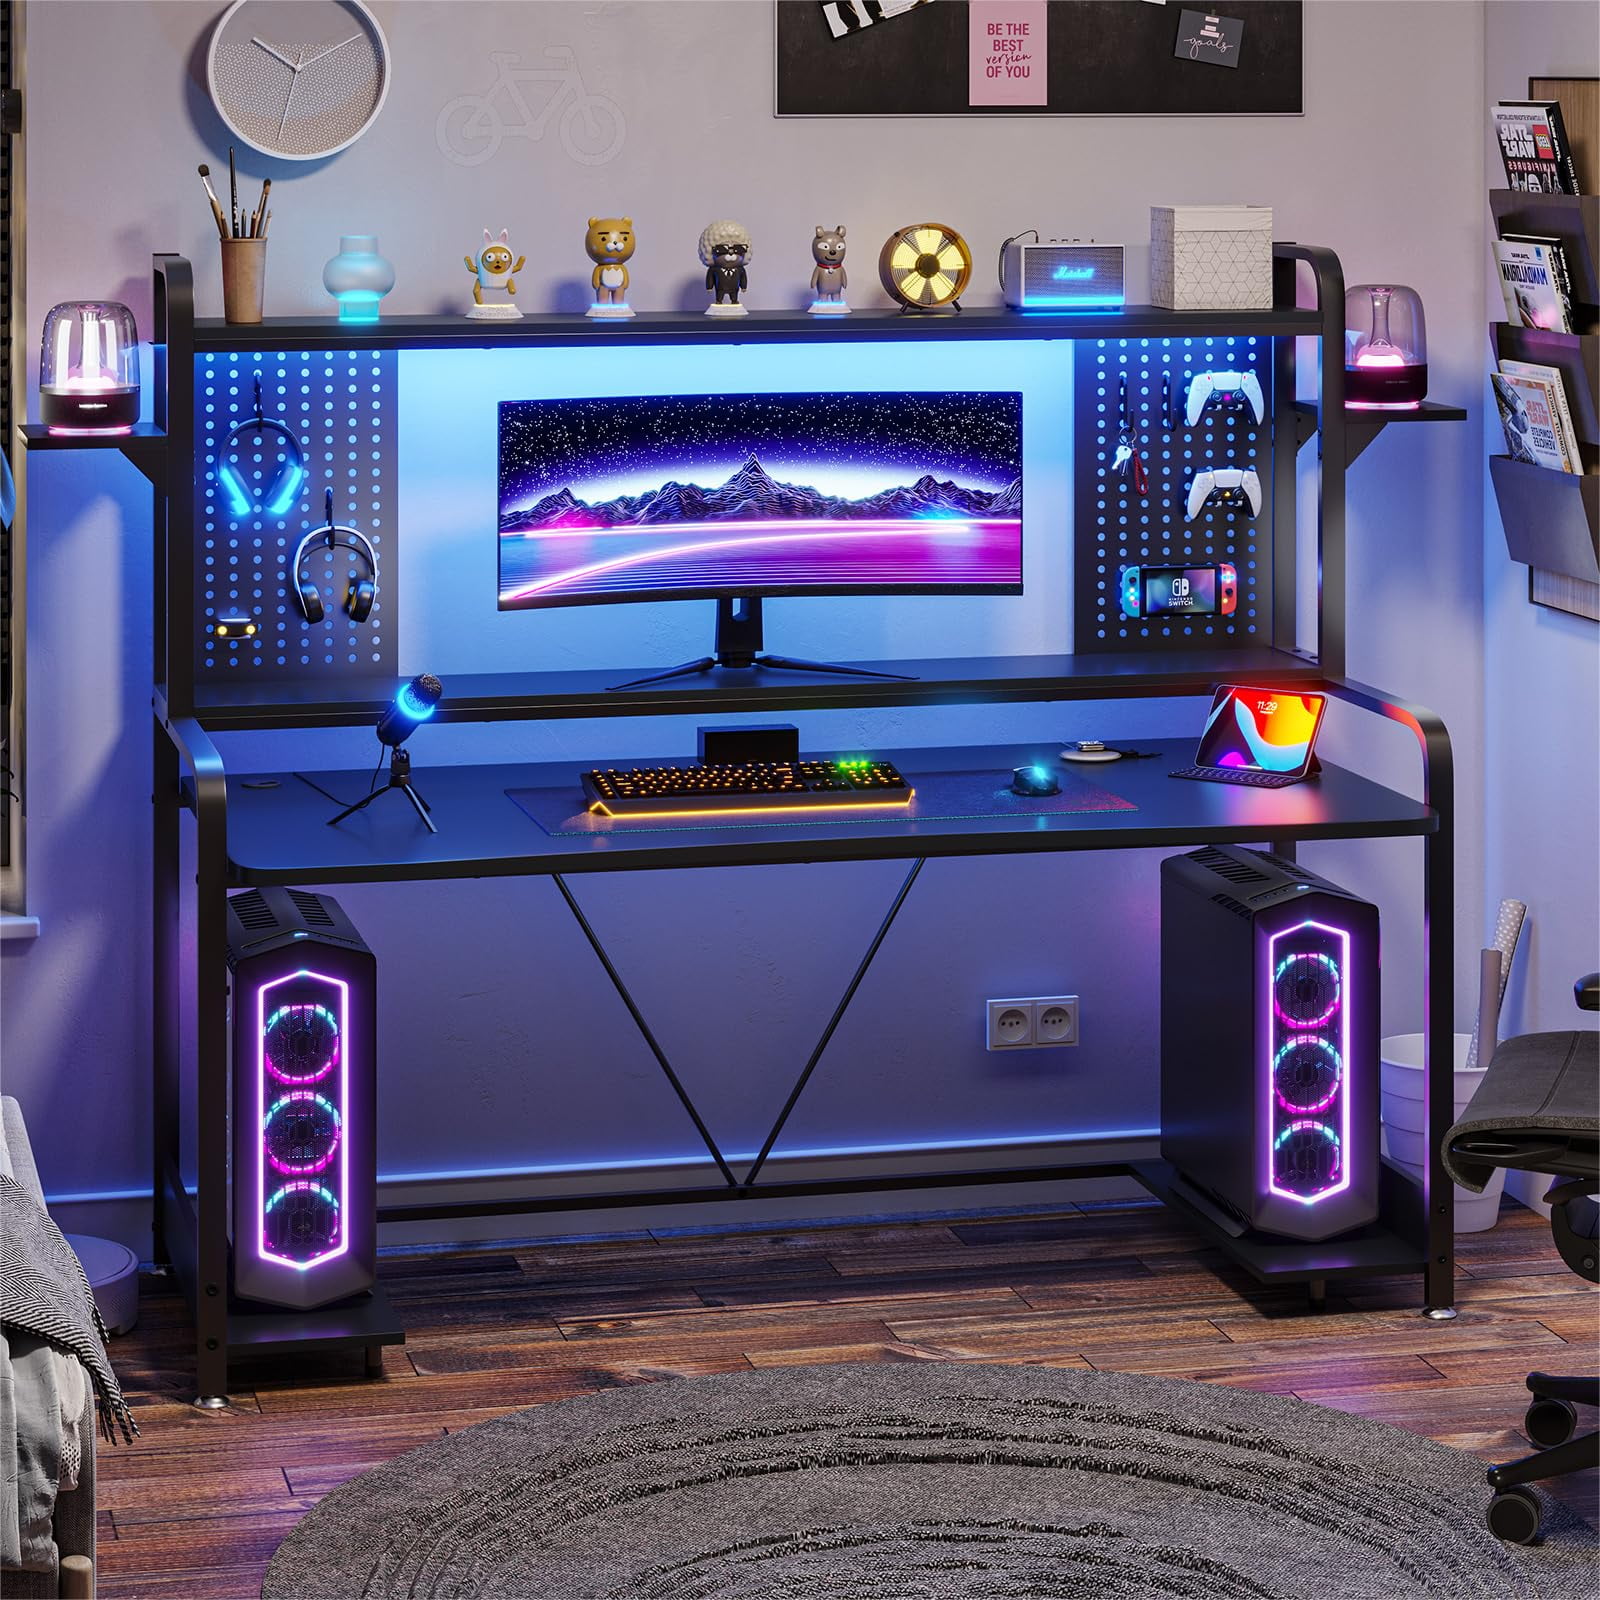 Led gaming desk • Compare (55 products) see prices »